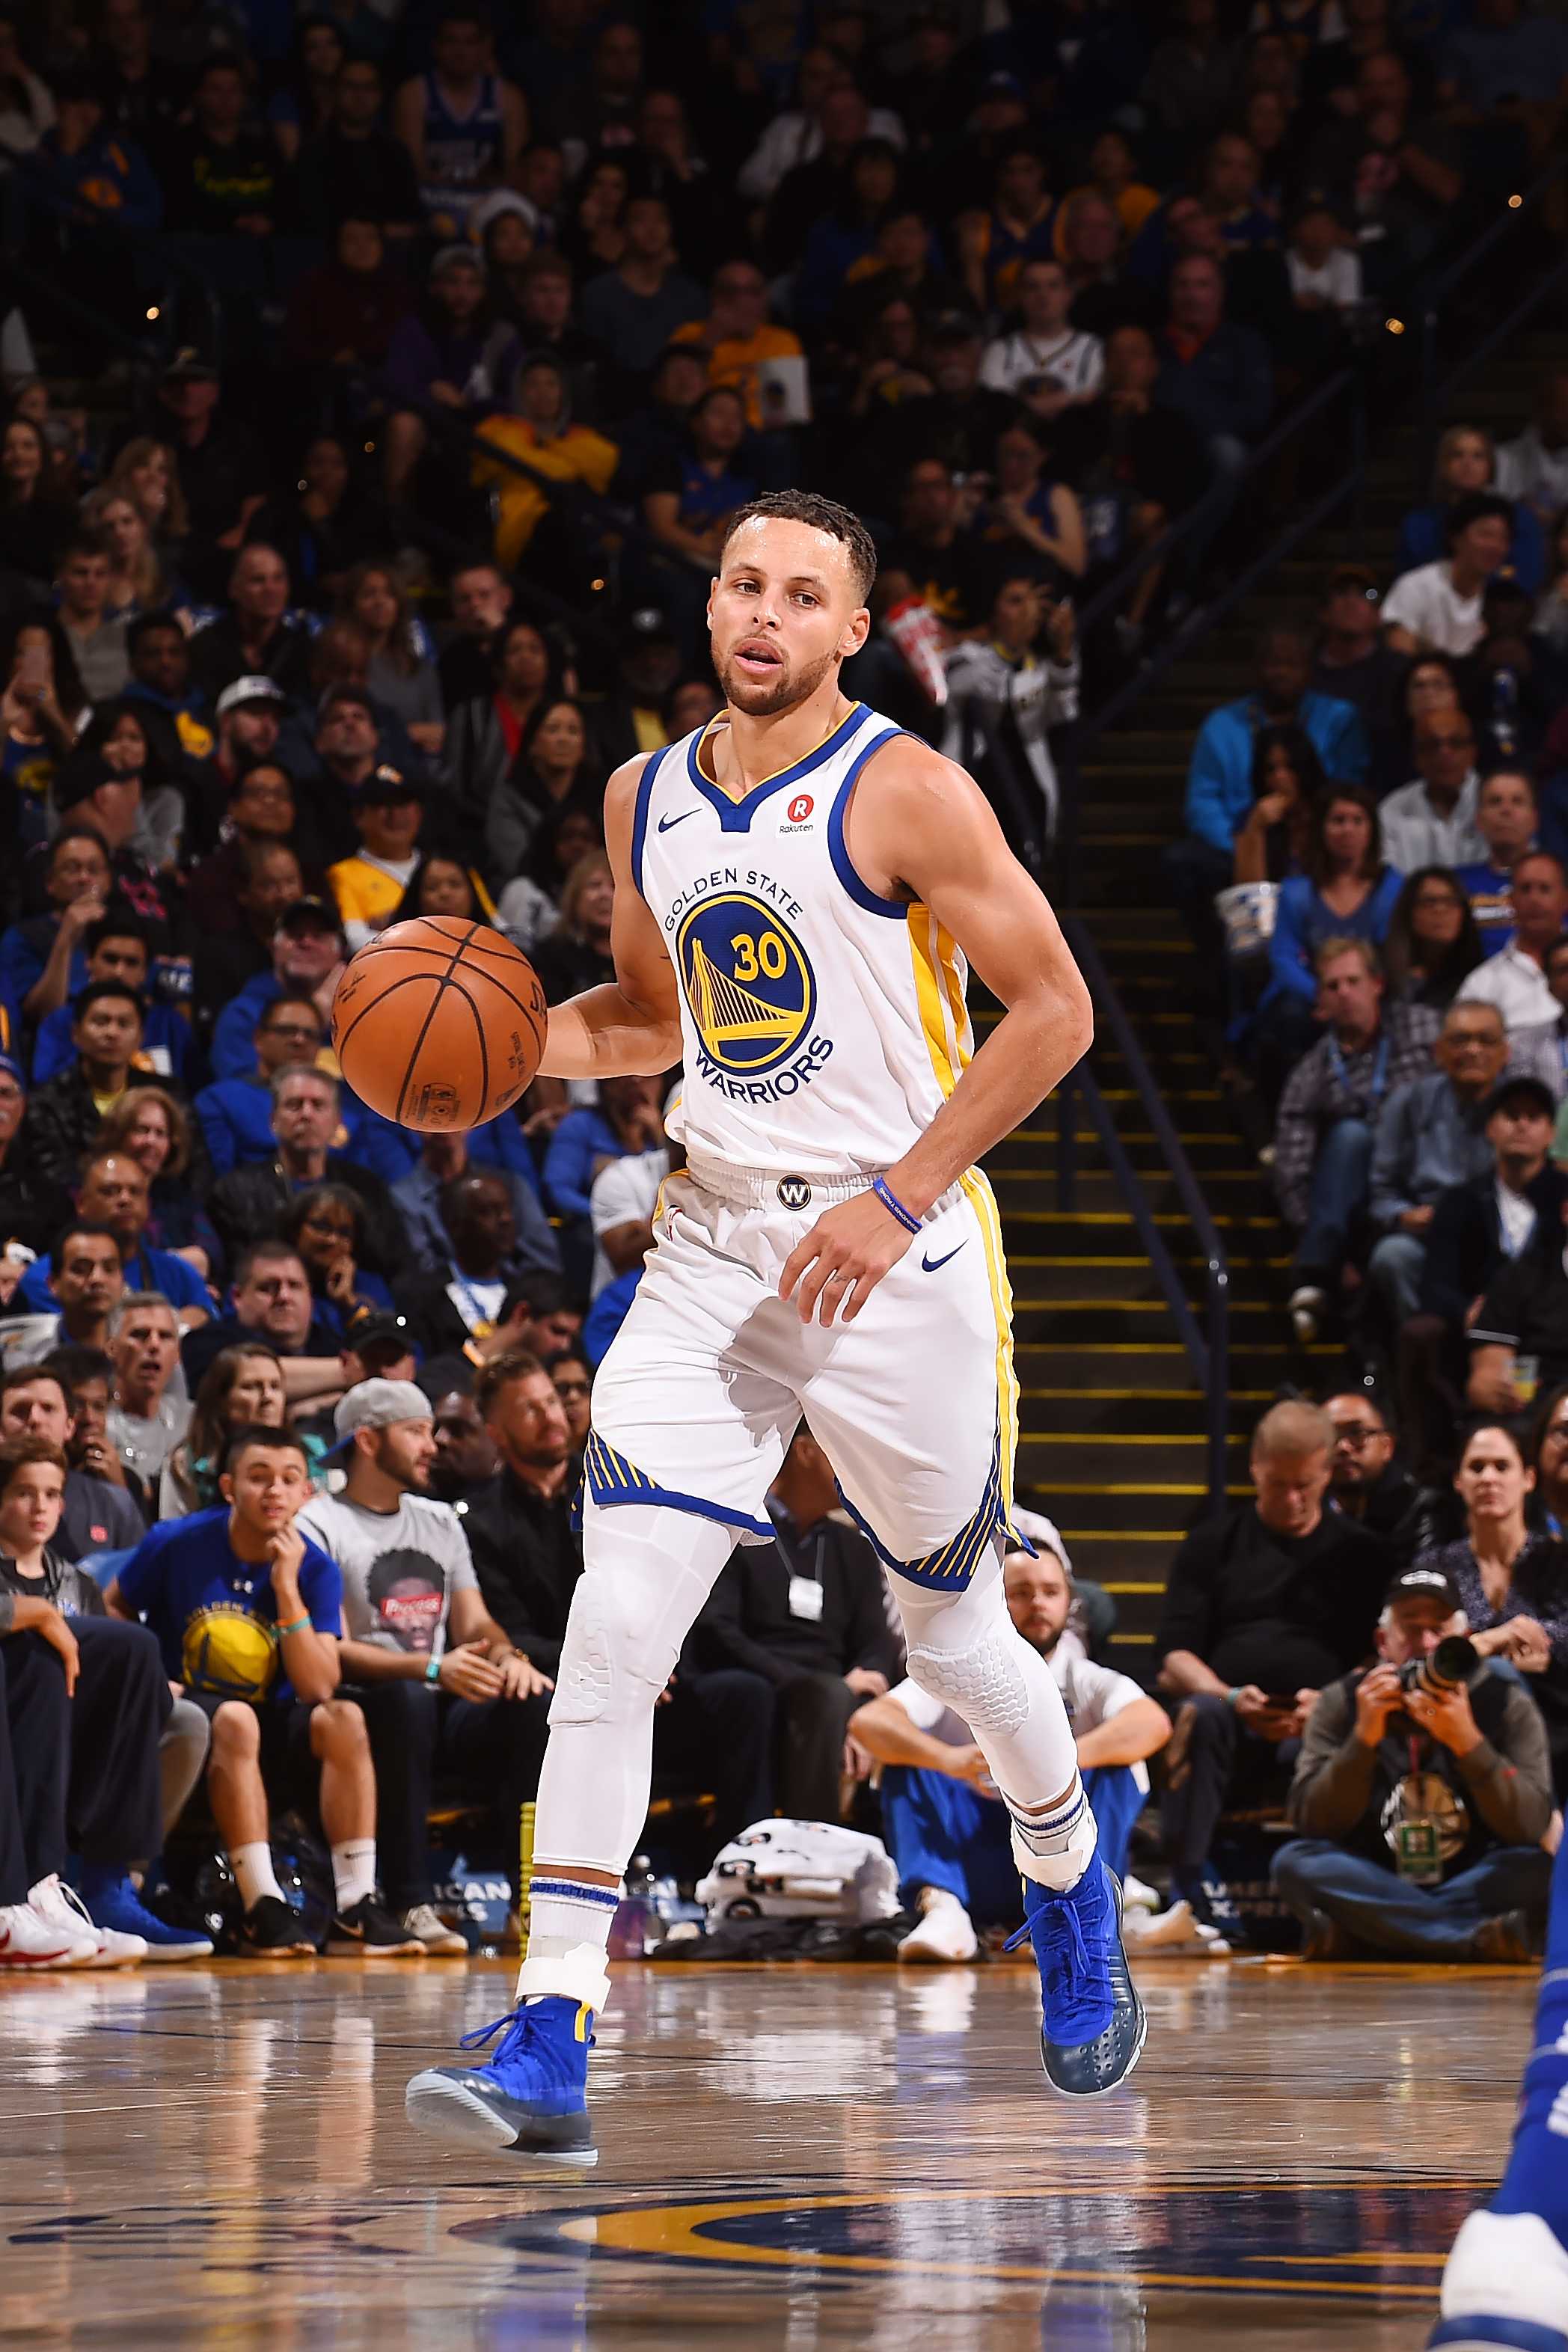 Wallpaper HD For Report Stephen Curry Thigh Will Play Vs Boston